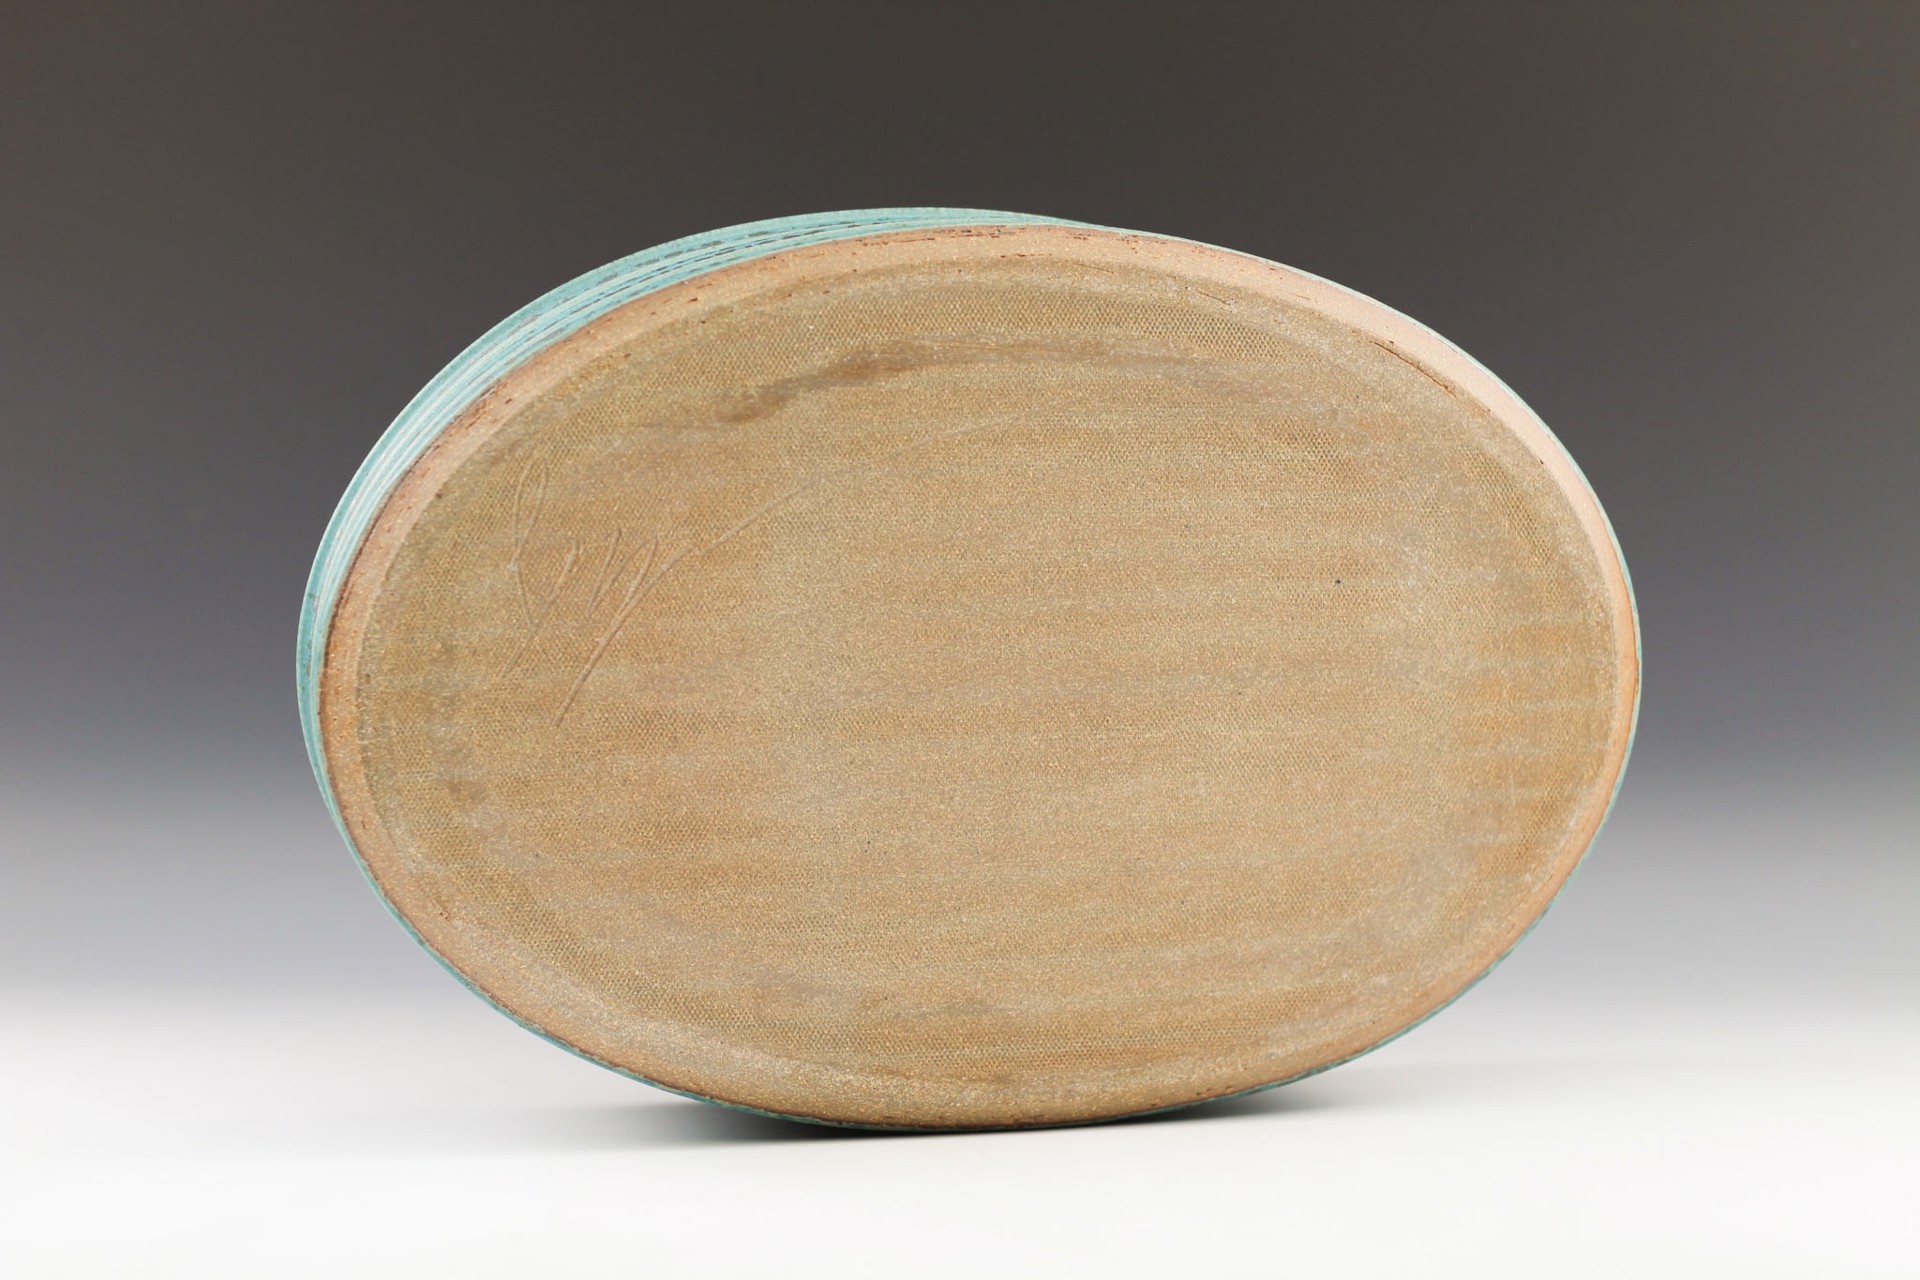 Turquoise Black Oval Platter by Winthrop Byers